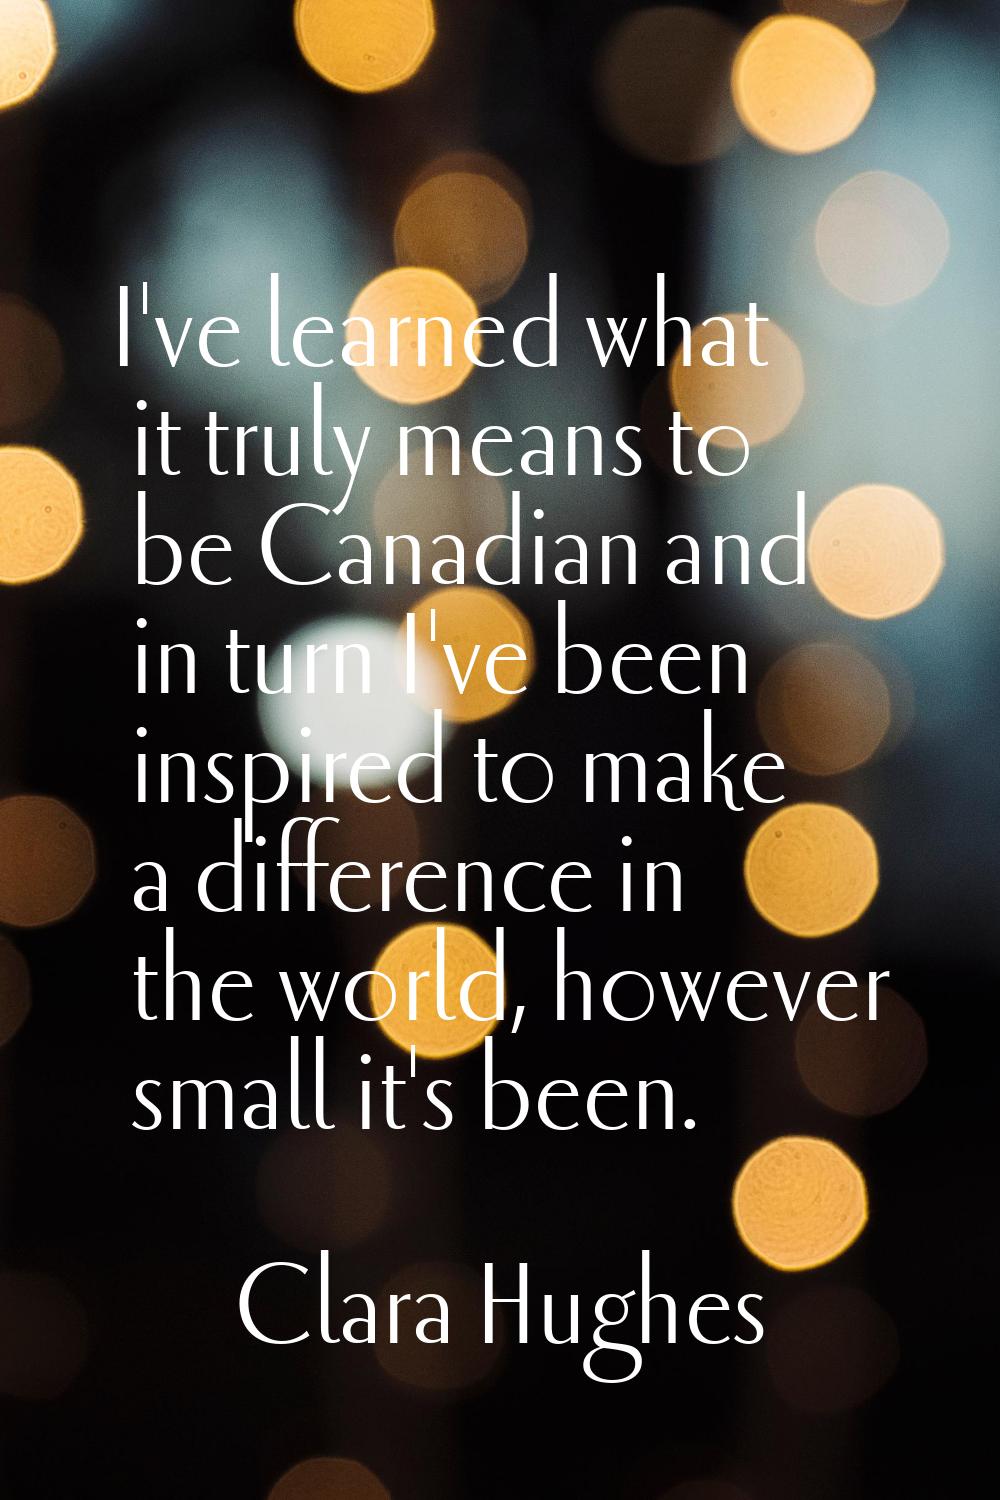 I've learned what it truly means to be Canadian and in turn I've been inspired to make a difference